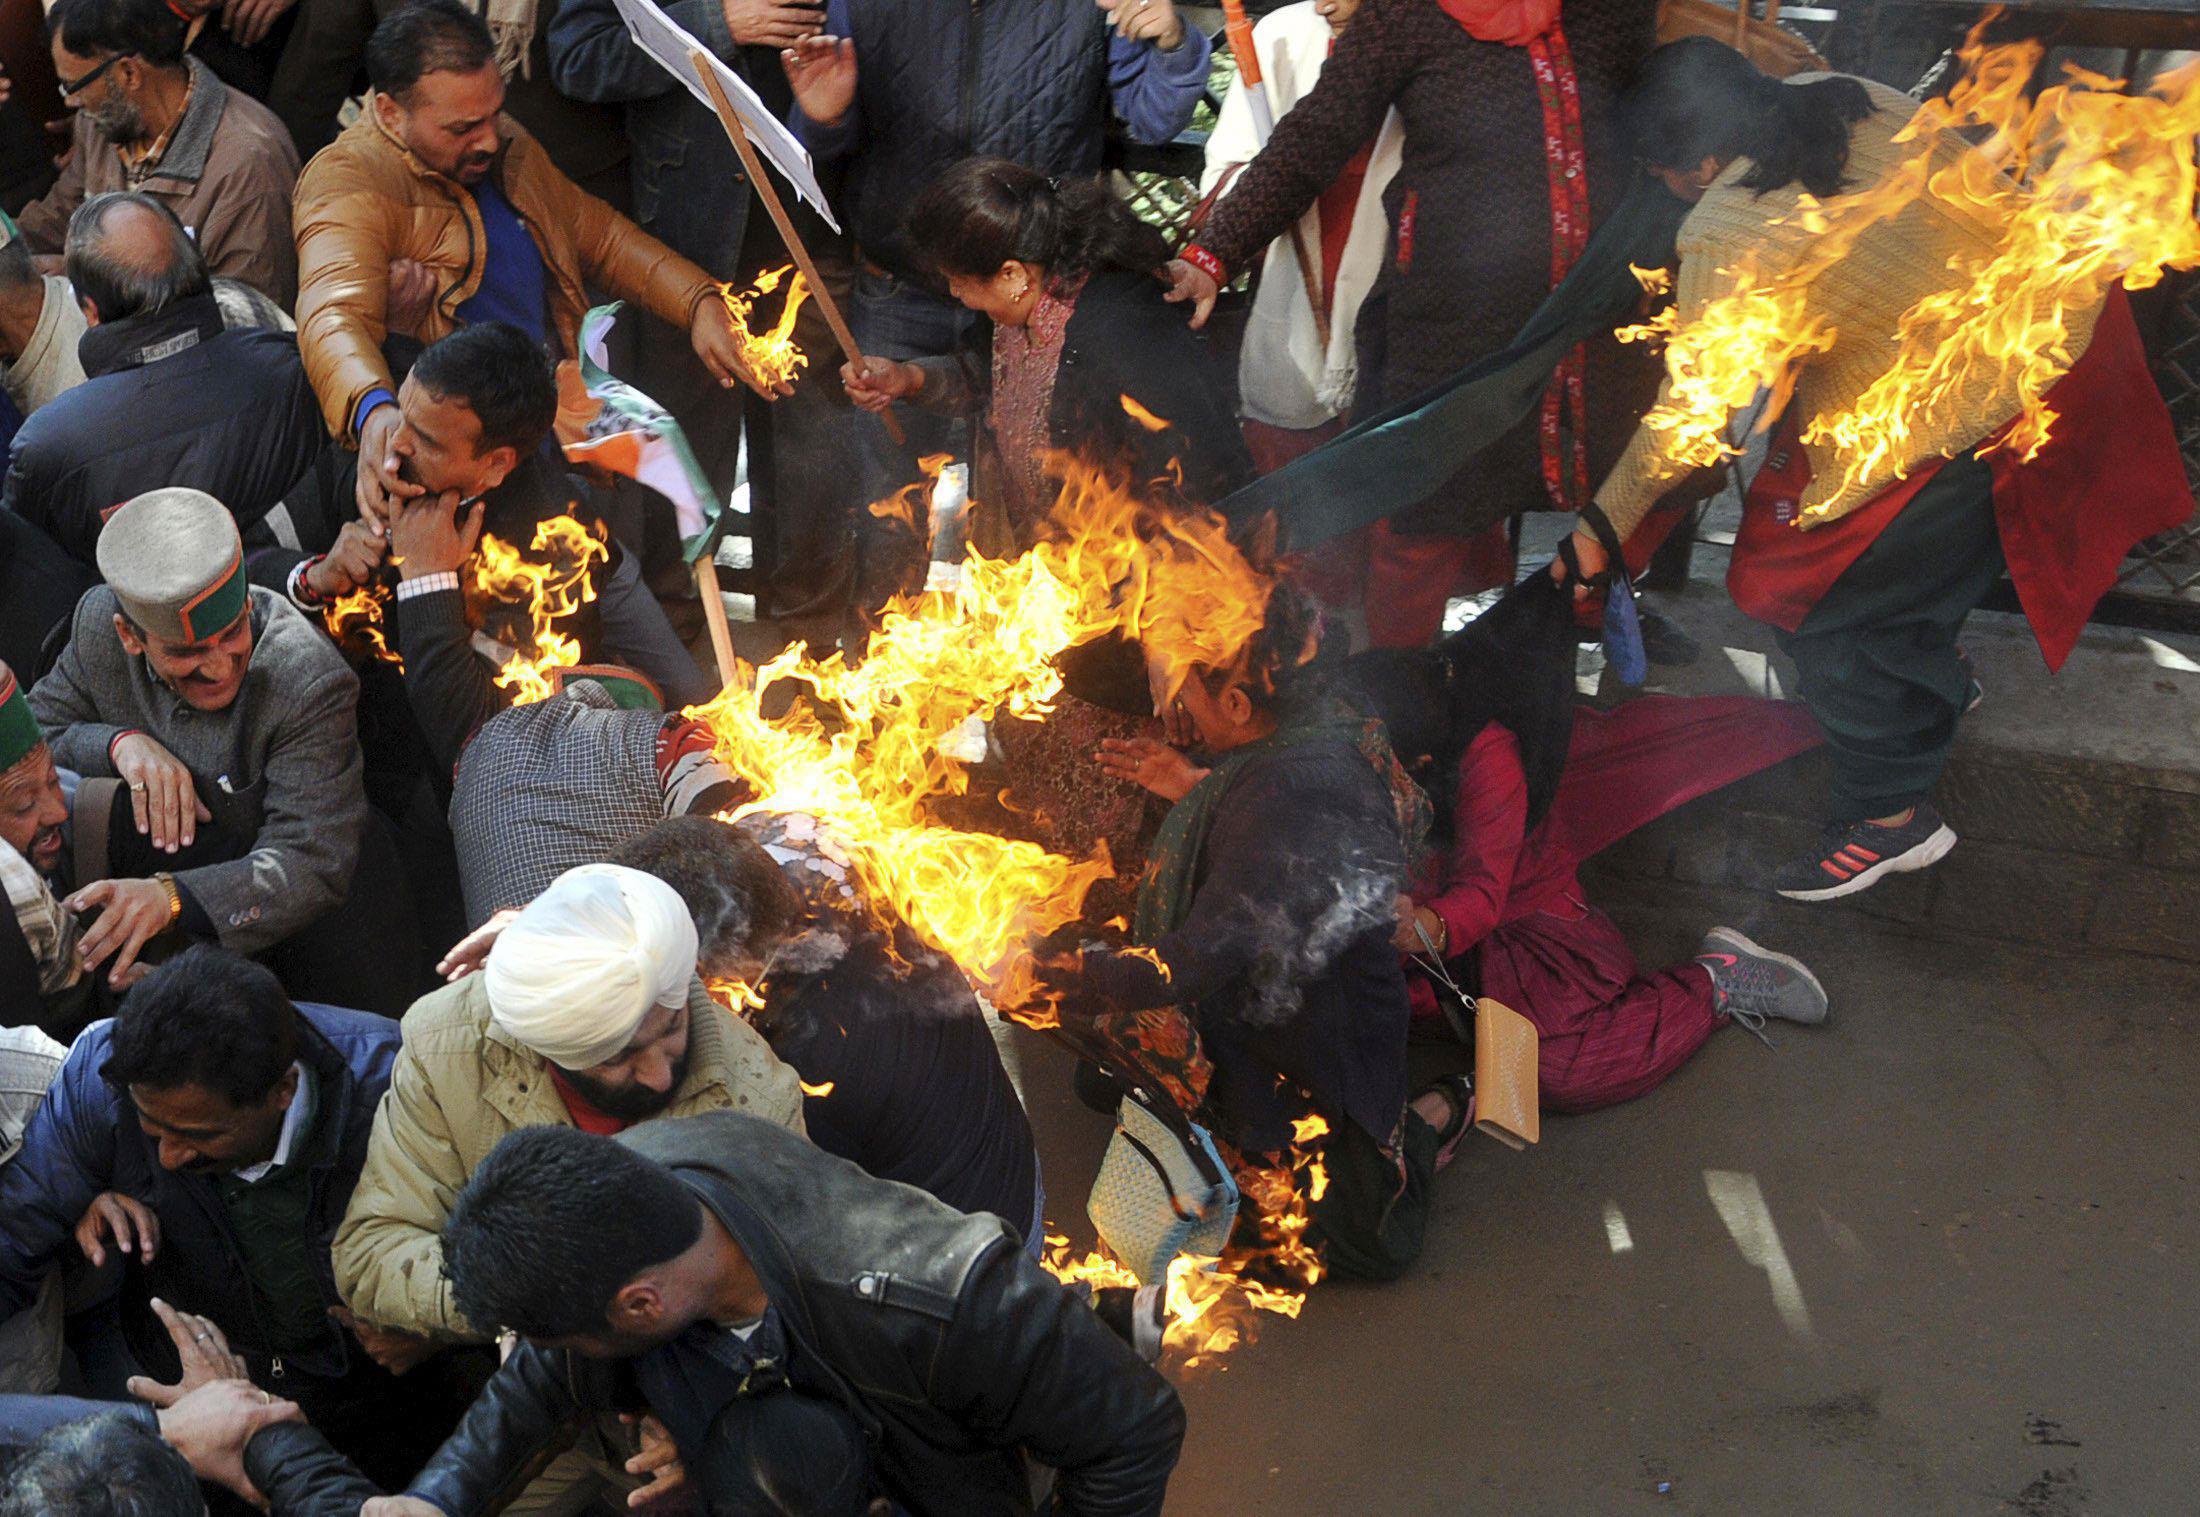 Activists from India's main opposition Congress party try to flee after their clothes caught fire wh